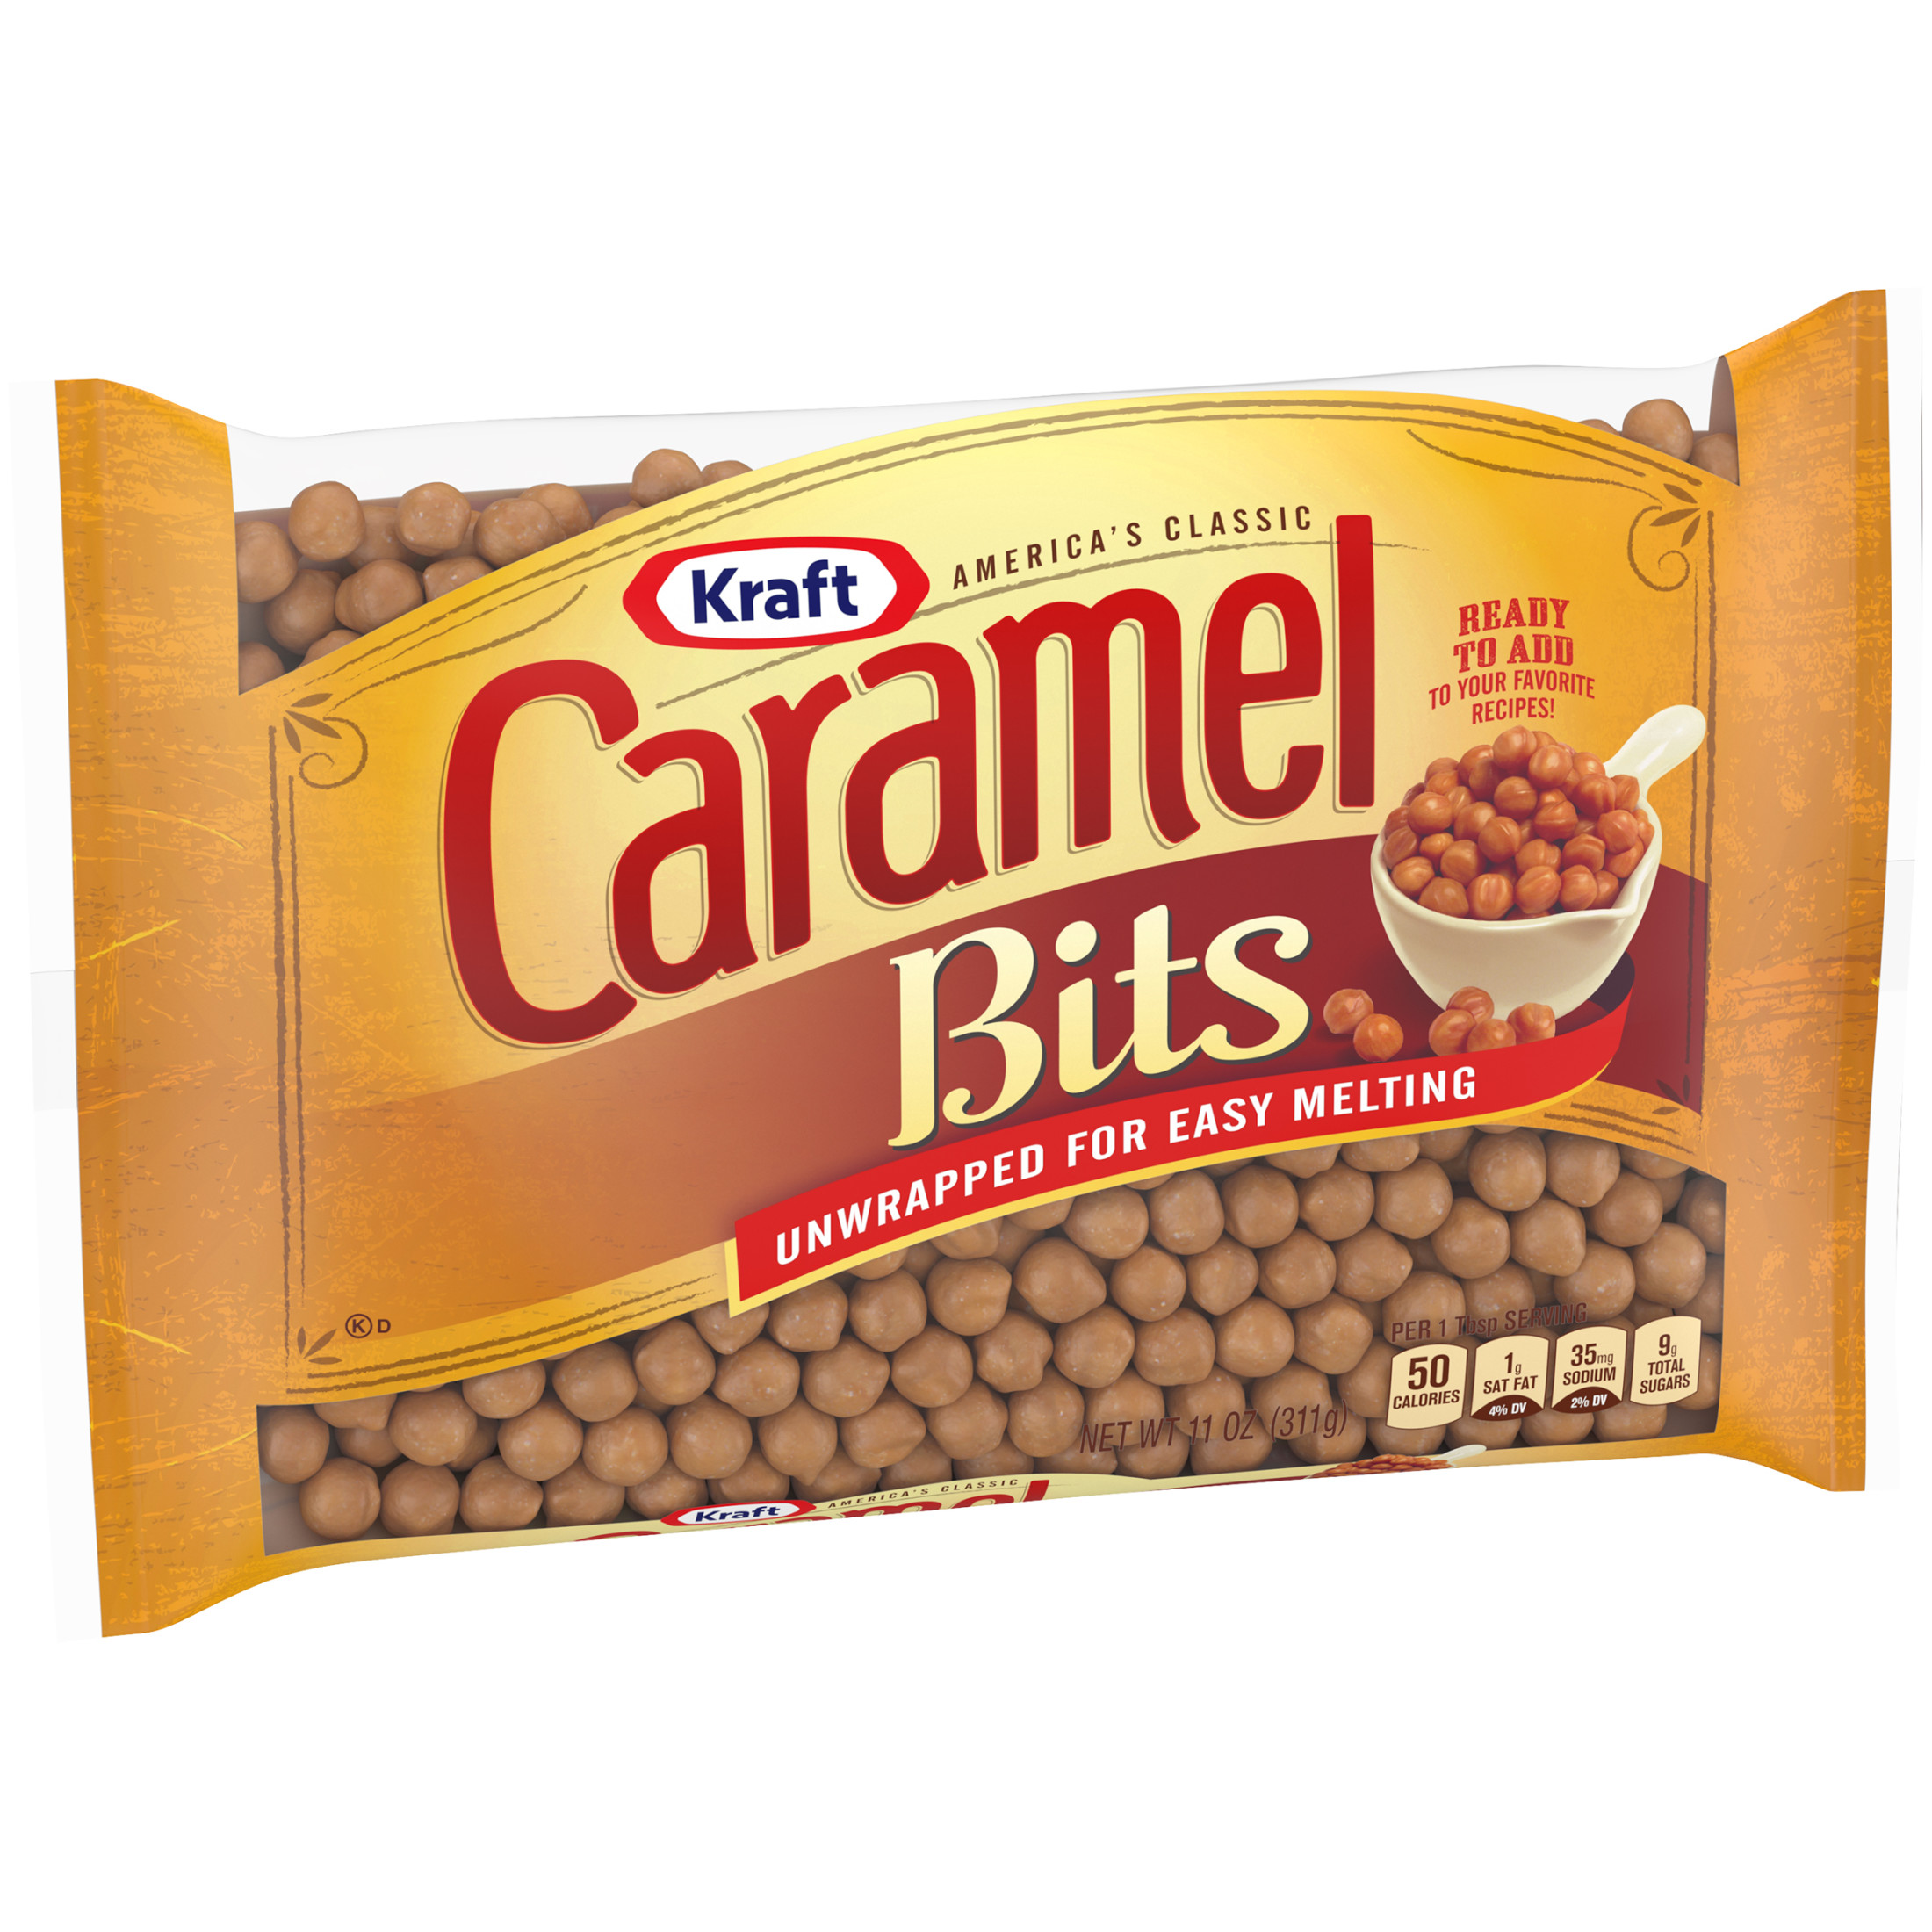 Kraft America's Classic Unwrapped Candy Caramel Bits for Easy Melting, 11 oz Bag - image 4 of 7